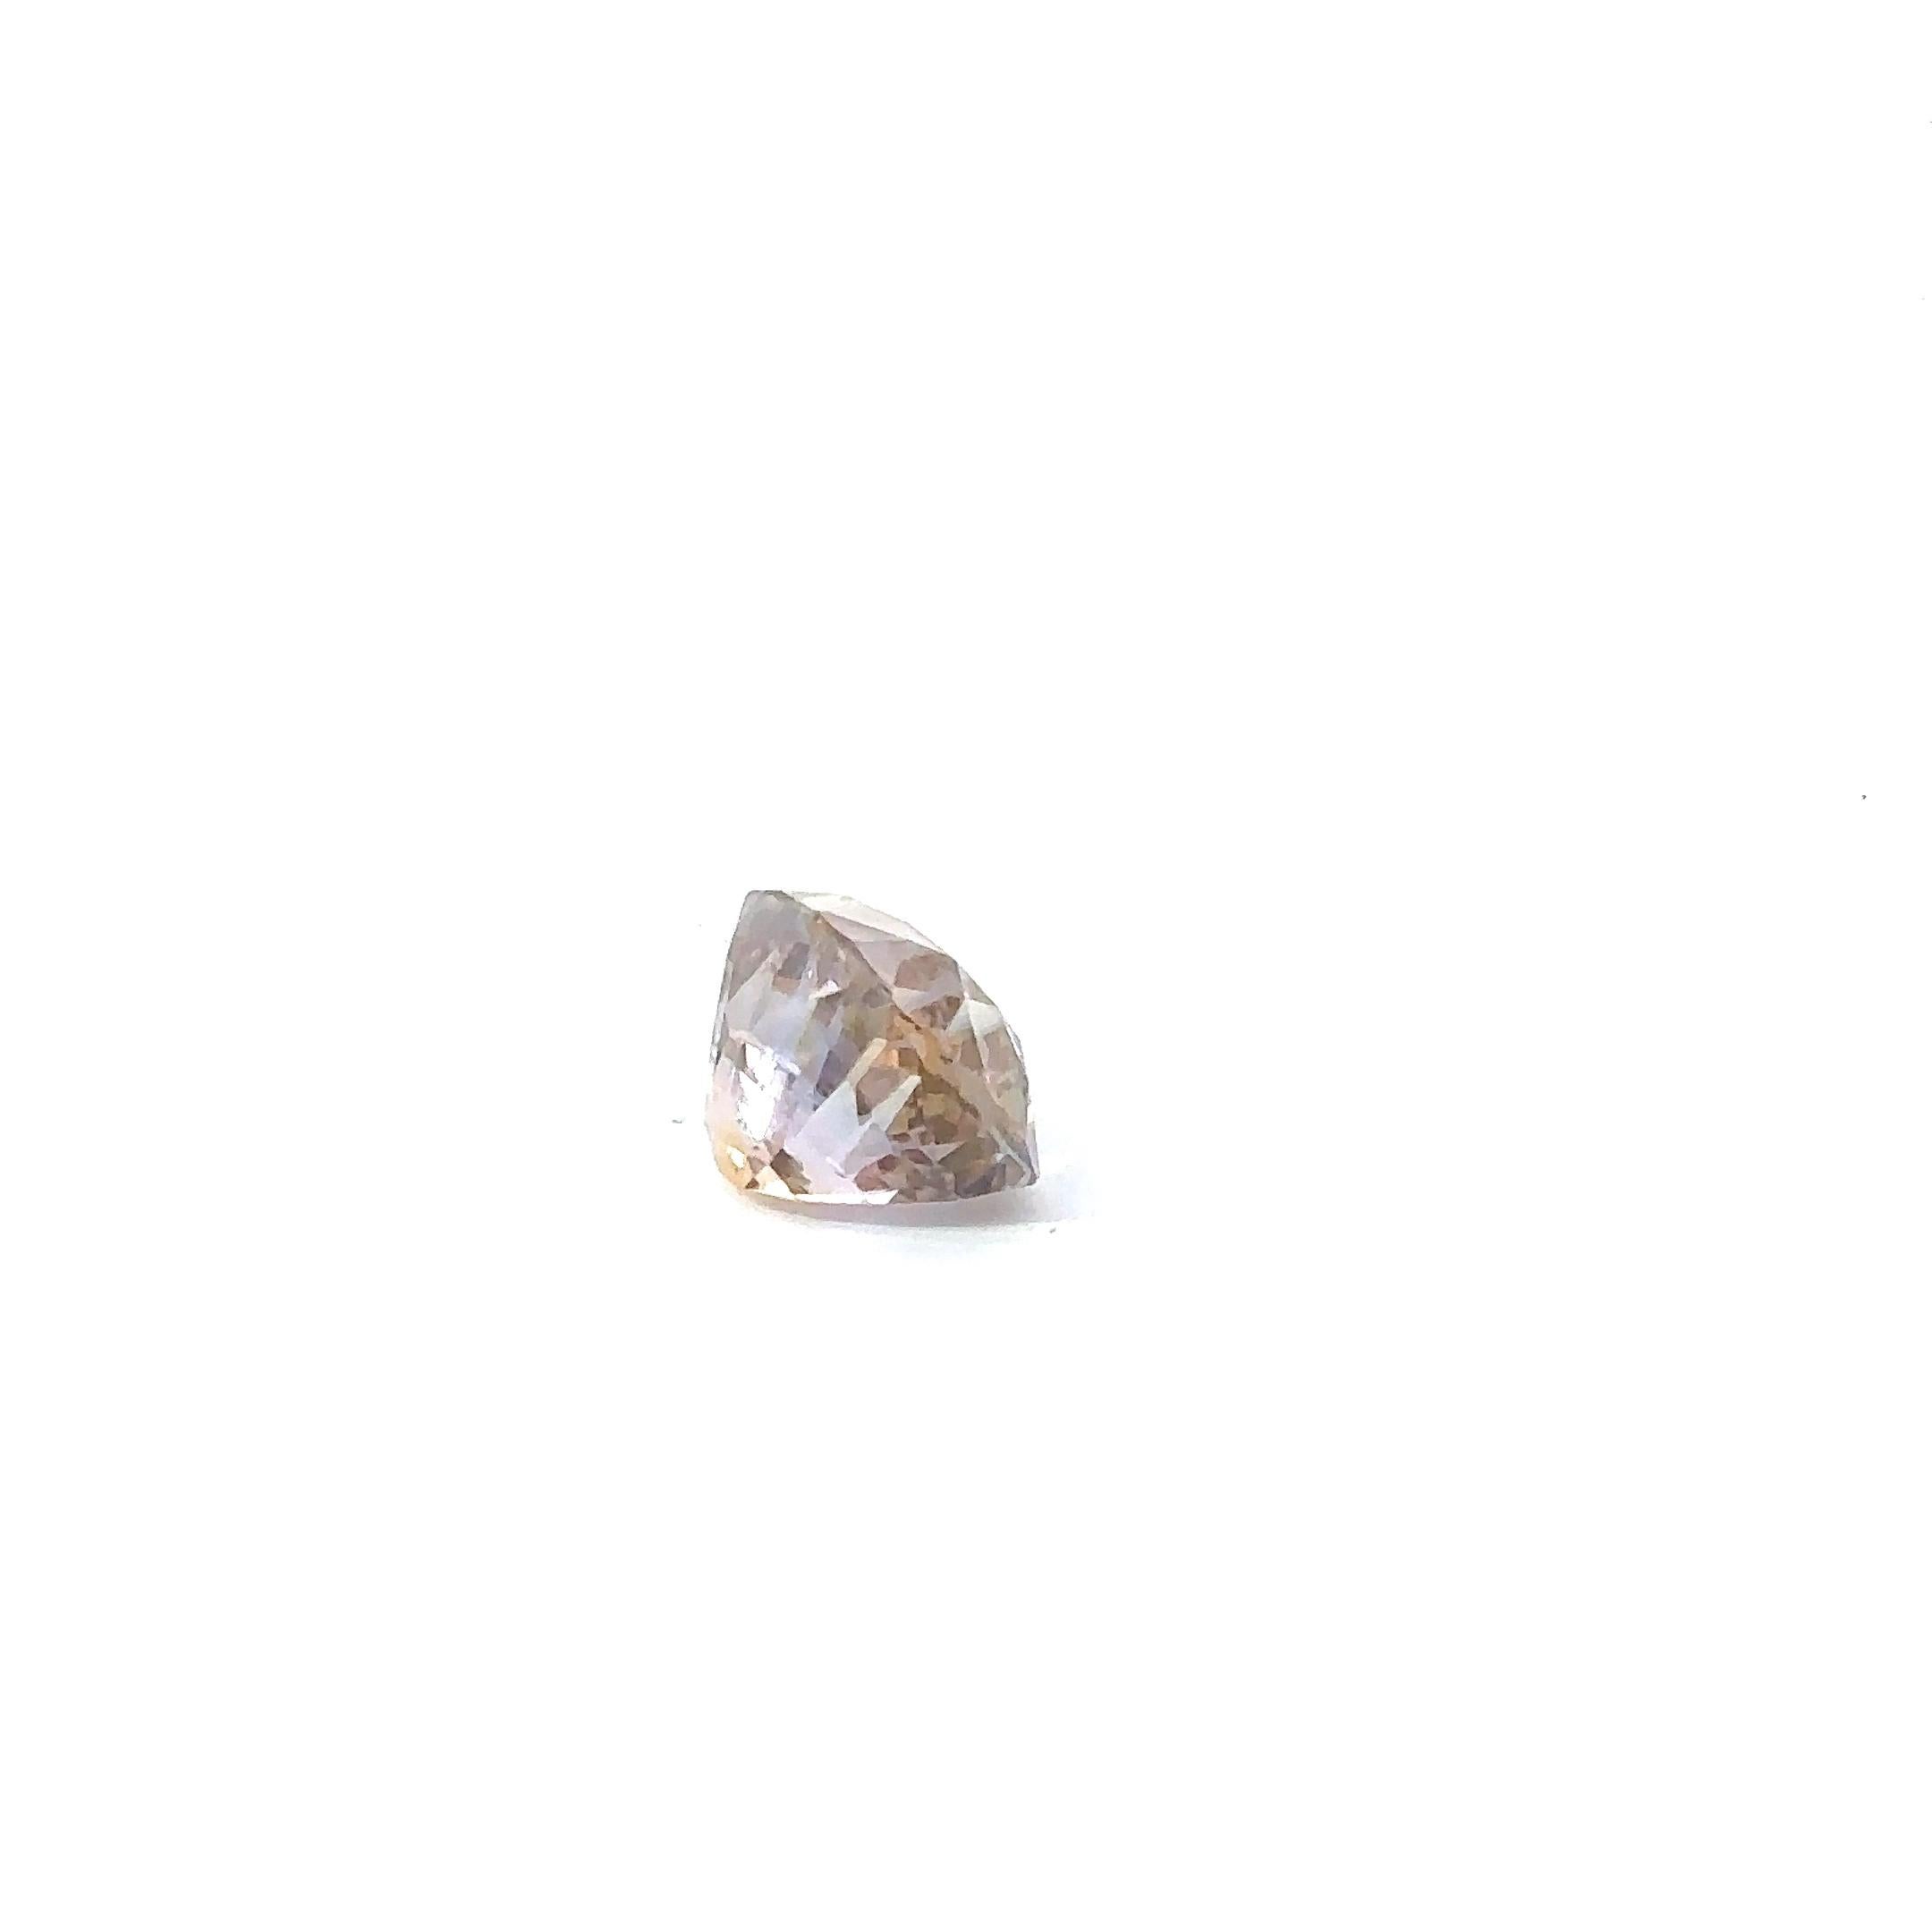 Artisan GIA Certified 6.16 Carat Heated Sapphire ( Orangy Yellow) For Sale